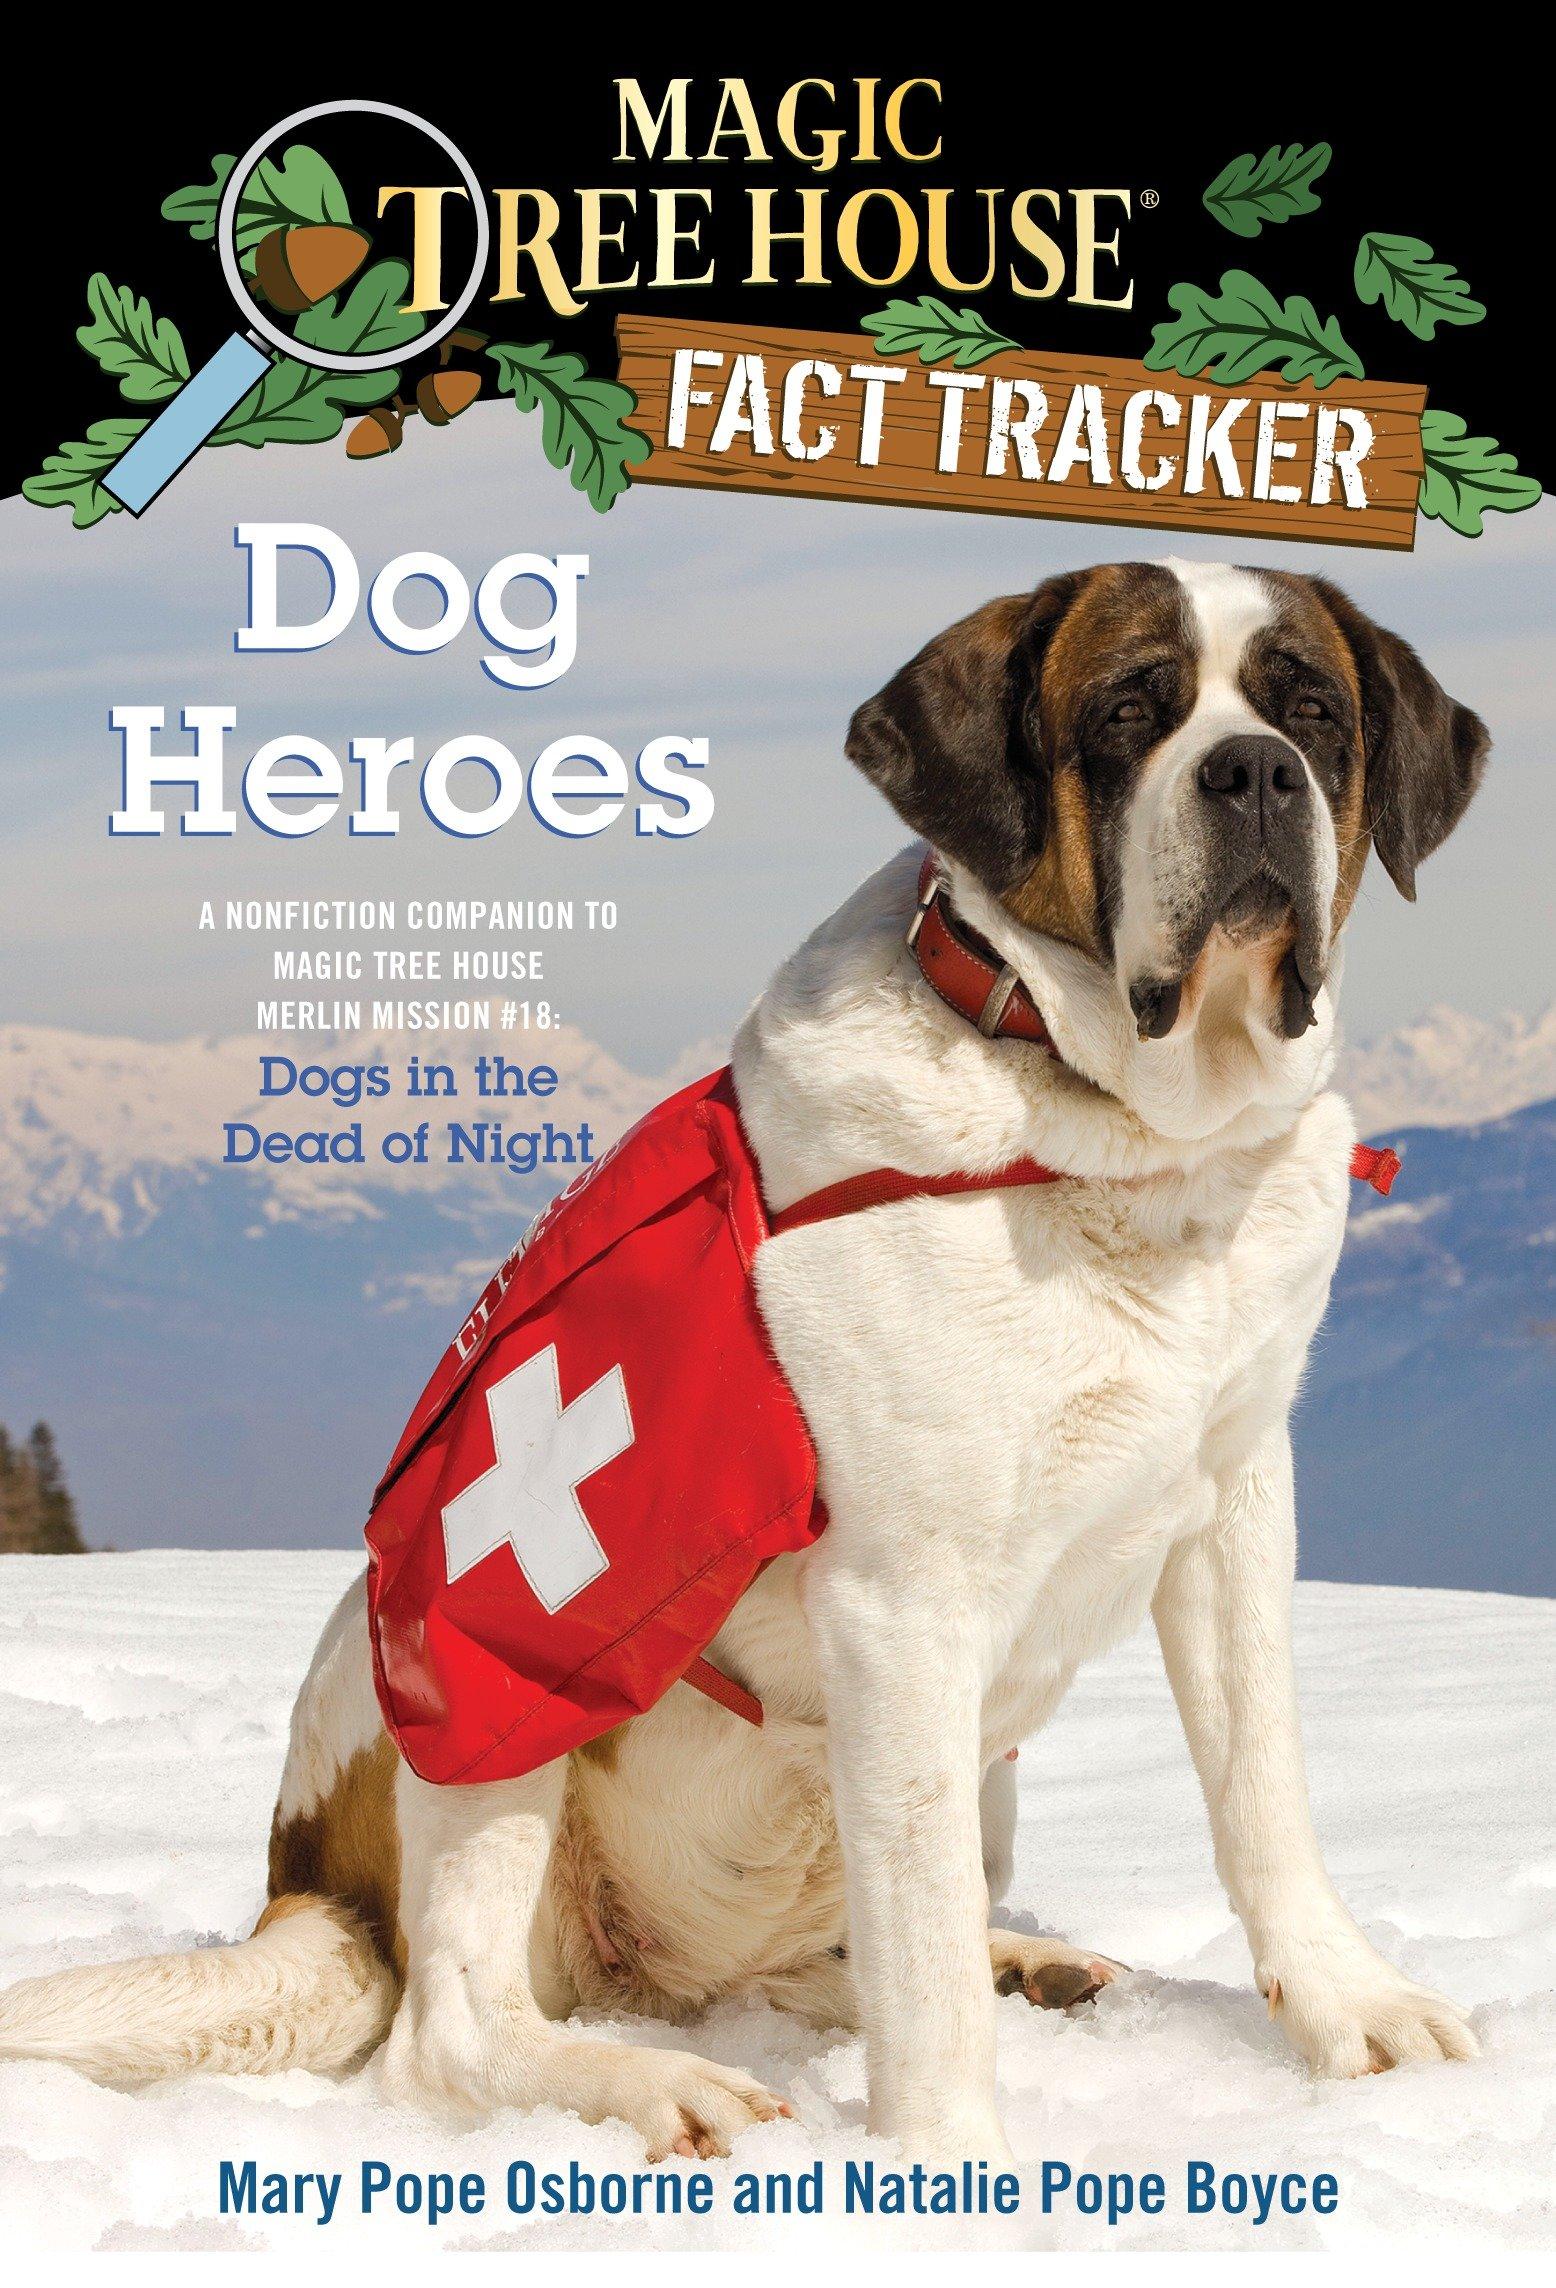 Dog Heroes / A Nonfiction Companion to Magic Tree House Merlin Mission #18: Dogs in the Dead of Night / Mary Pope Osborne (u. a.) / Taschenbuch / Einband - flex.(Paperback) / Englisch / 2011 - Osborne, Mary Pope